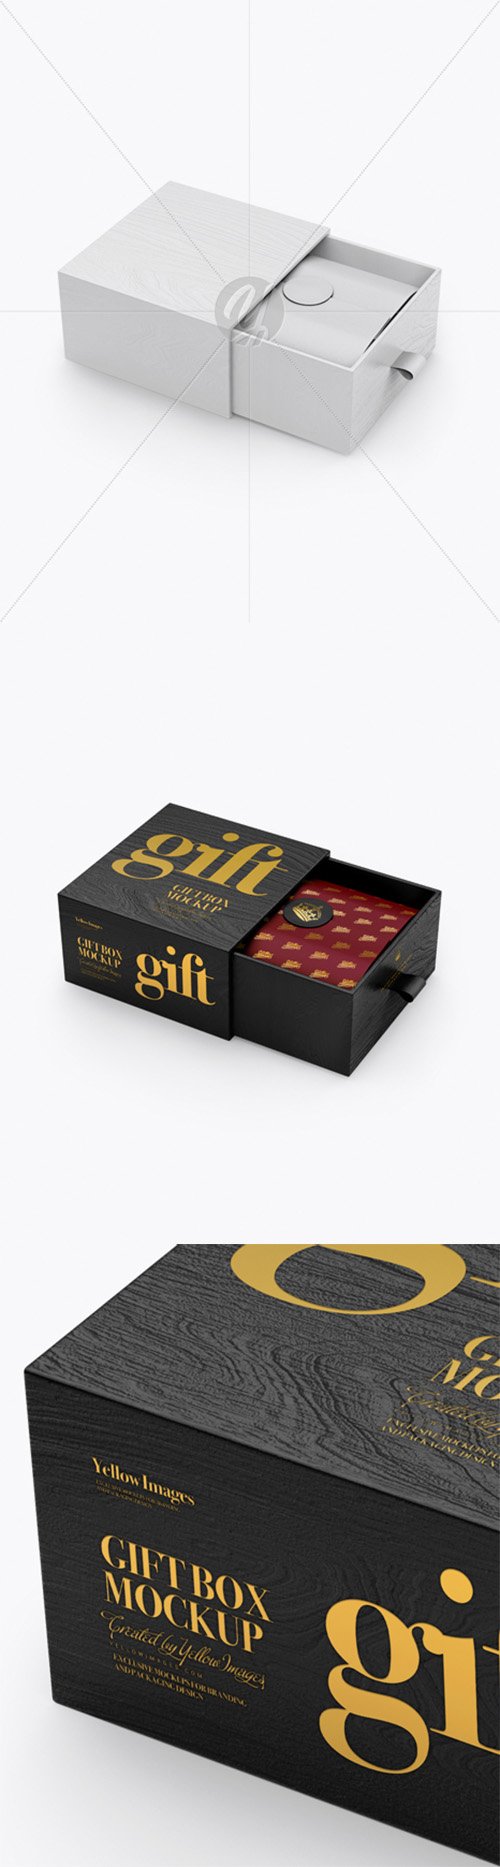 Opened Wooden Gift Box Mockup - Half Side View 22339 TIF